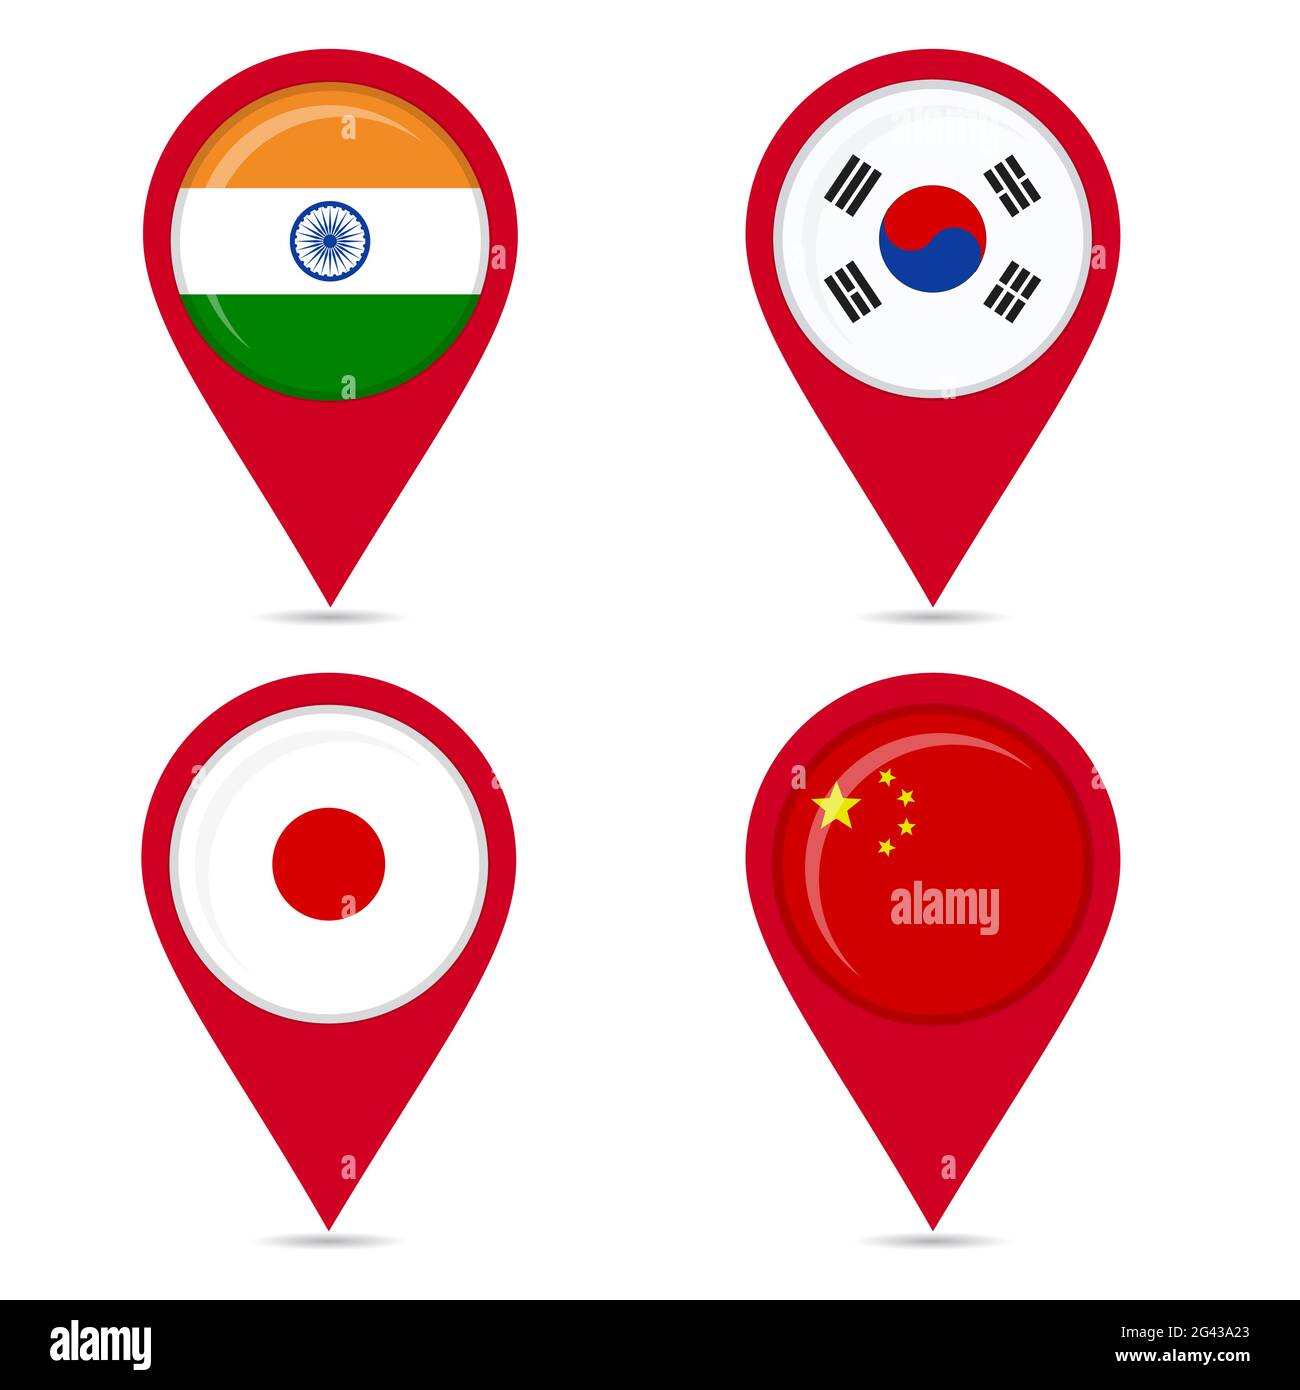 Map pin icons of national flags: india, south korea, japan, china. White background. Stock Vector